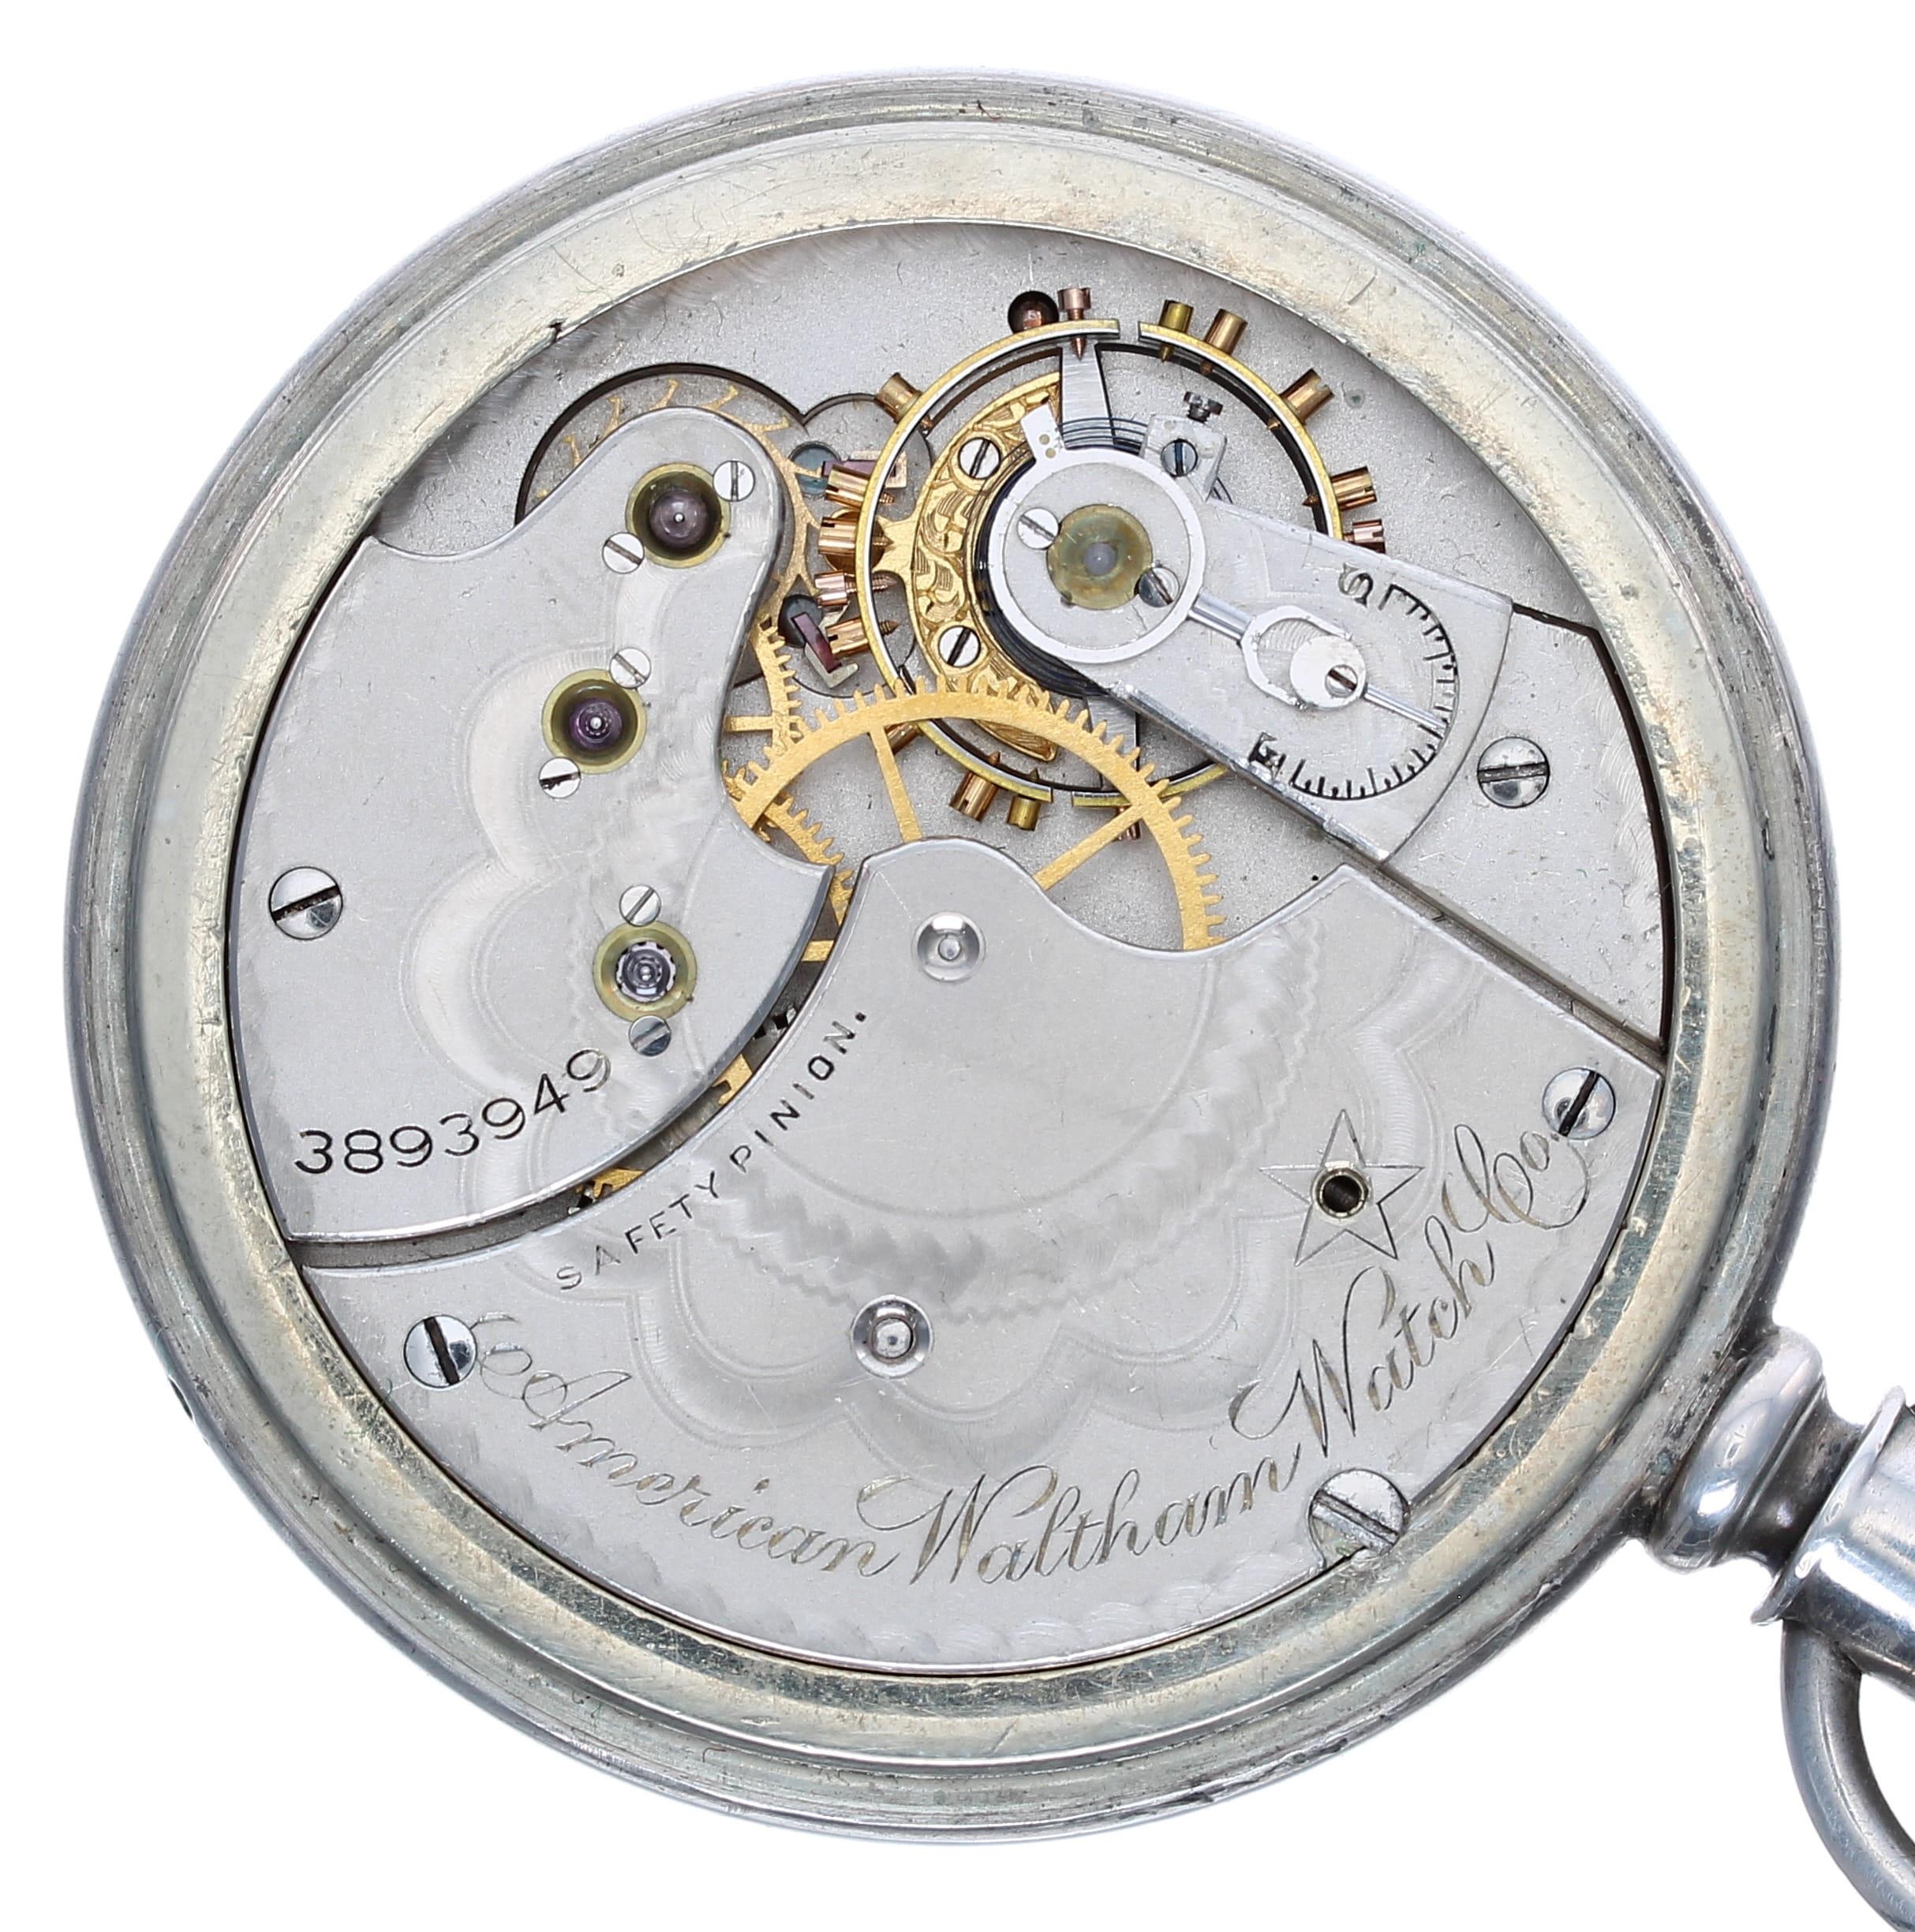 American Waltham nickel cased lever pocket watch, signed movement, no. 3893949, with safety - Image 2 of 3